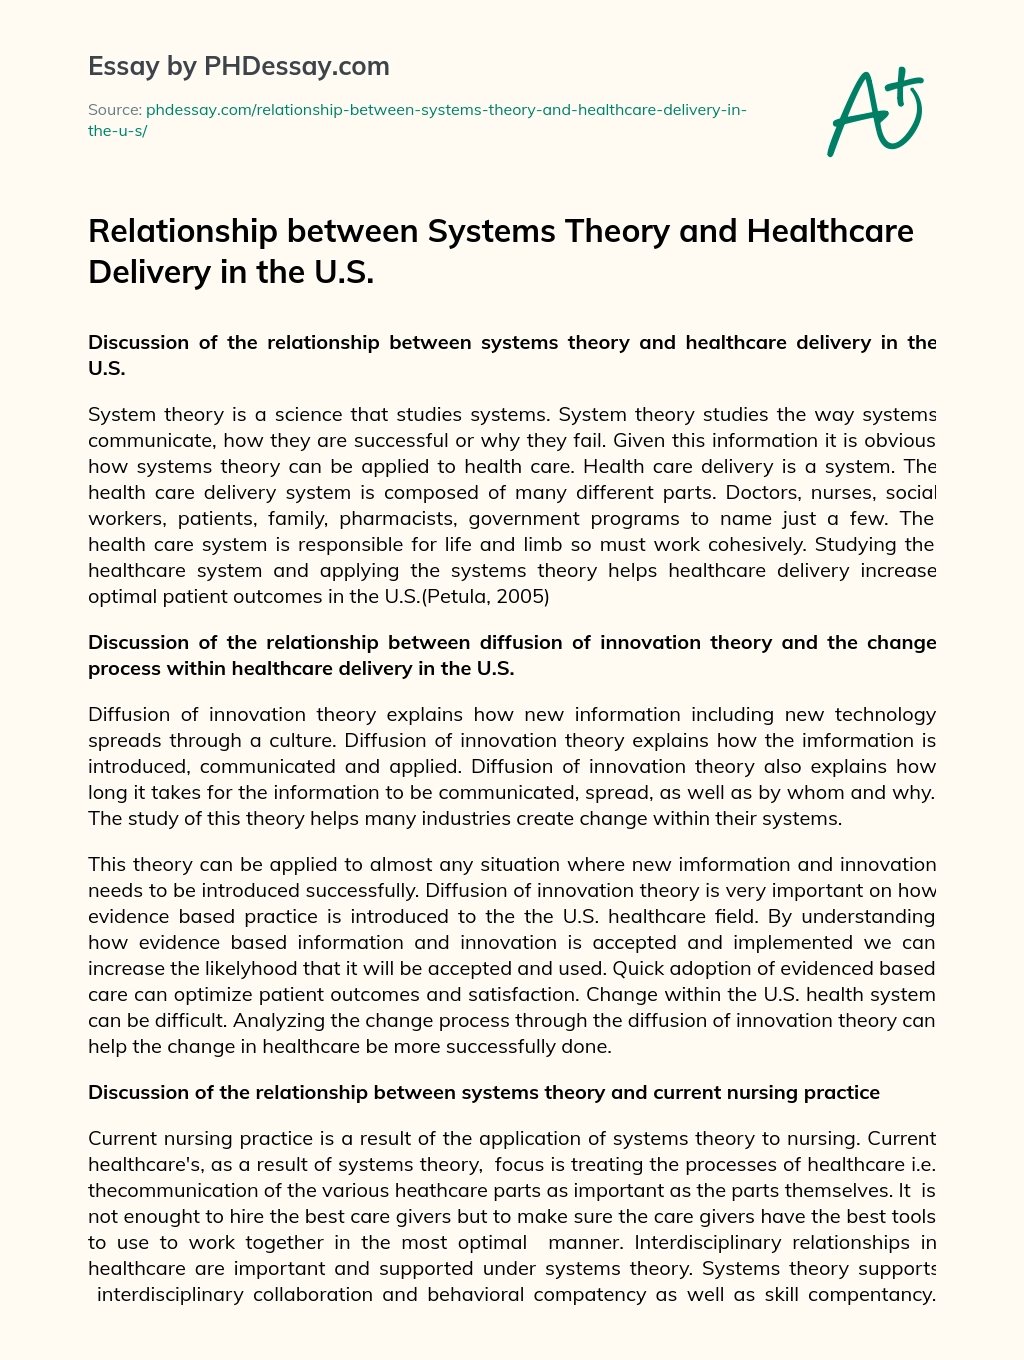 Relationship between Systems Theory and Healthcare Delivery in the U.S. essay